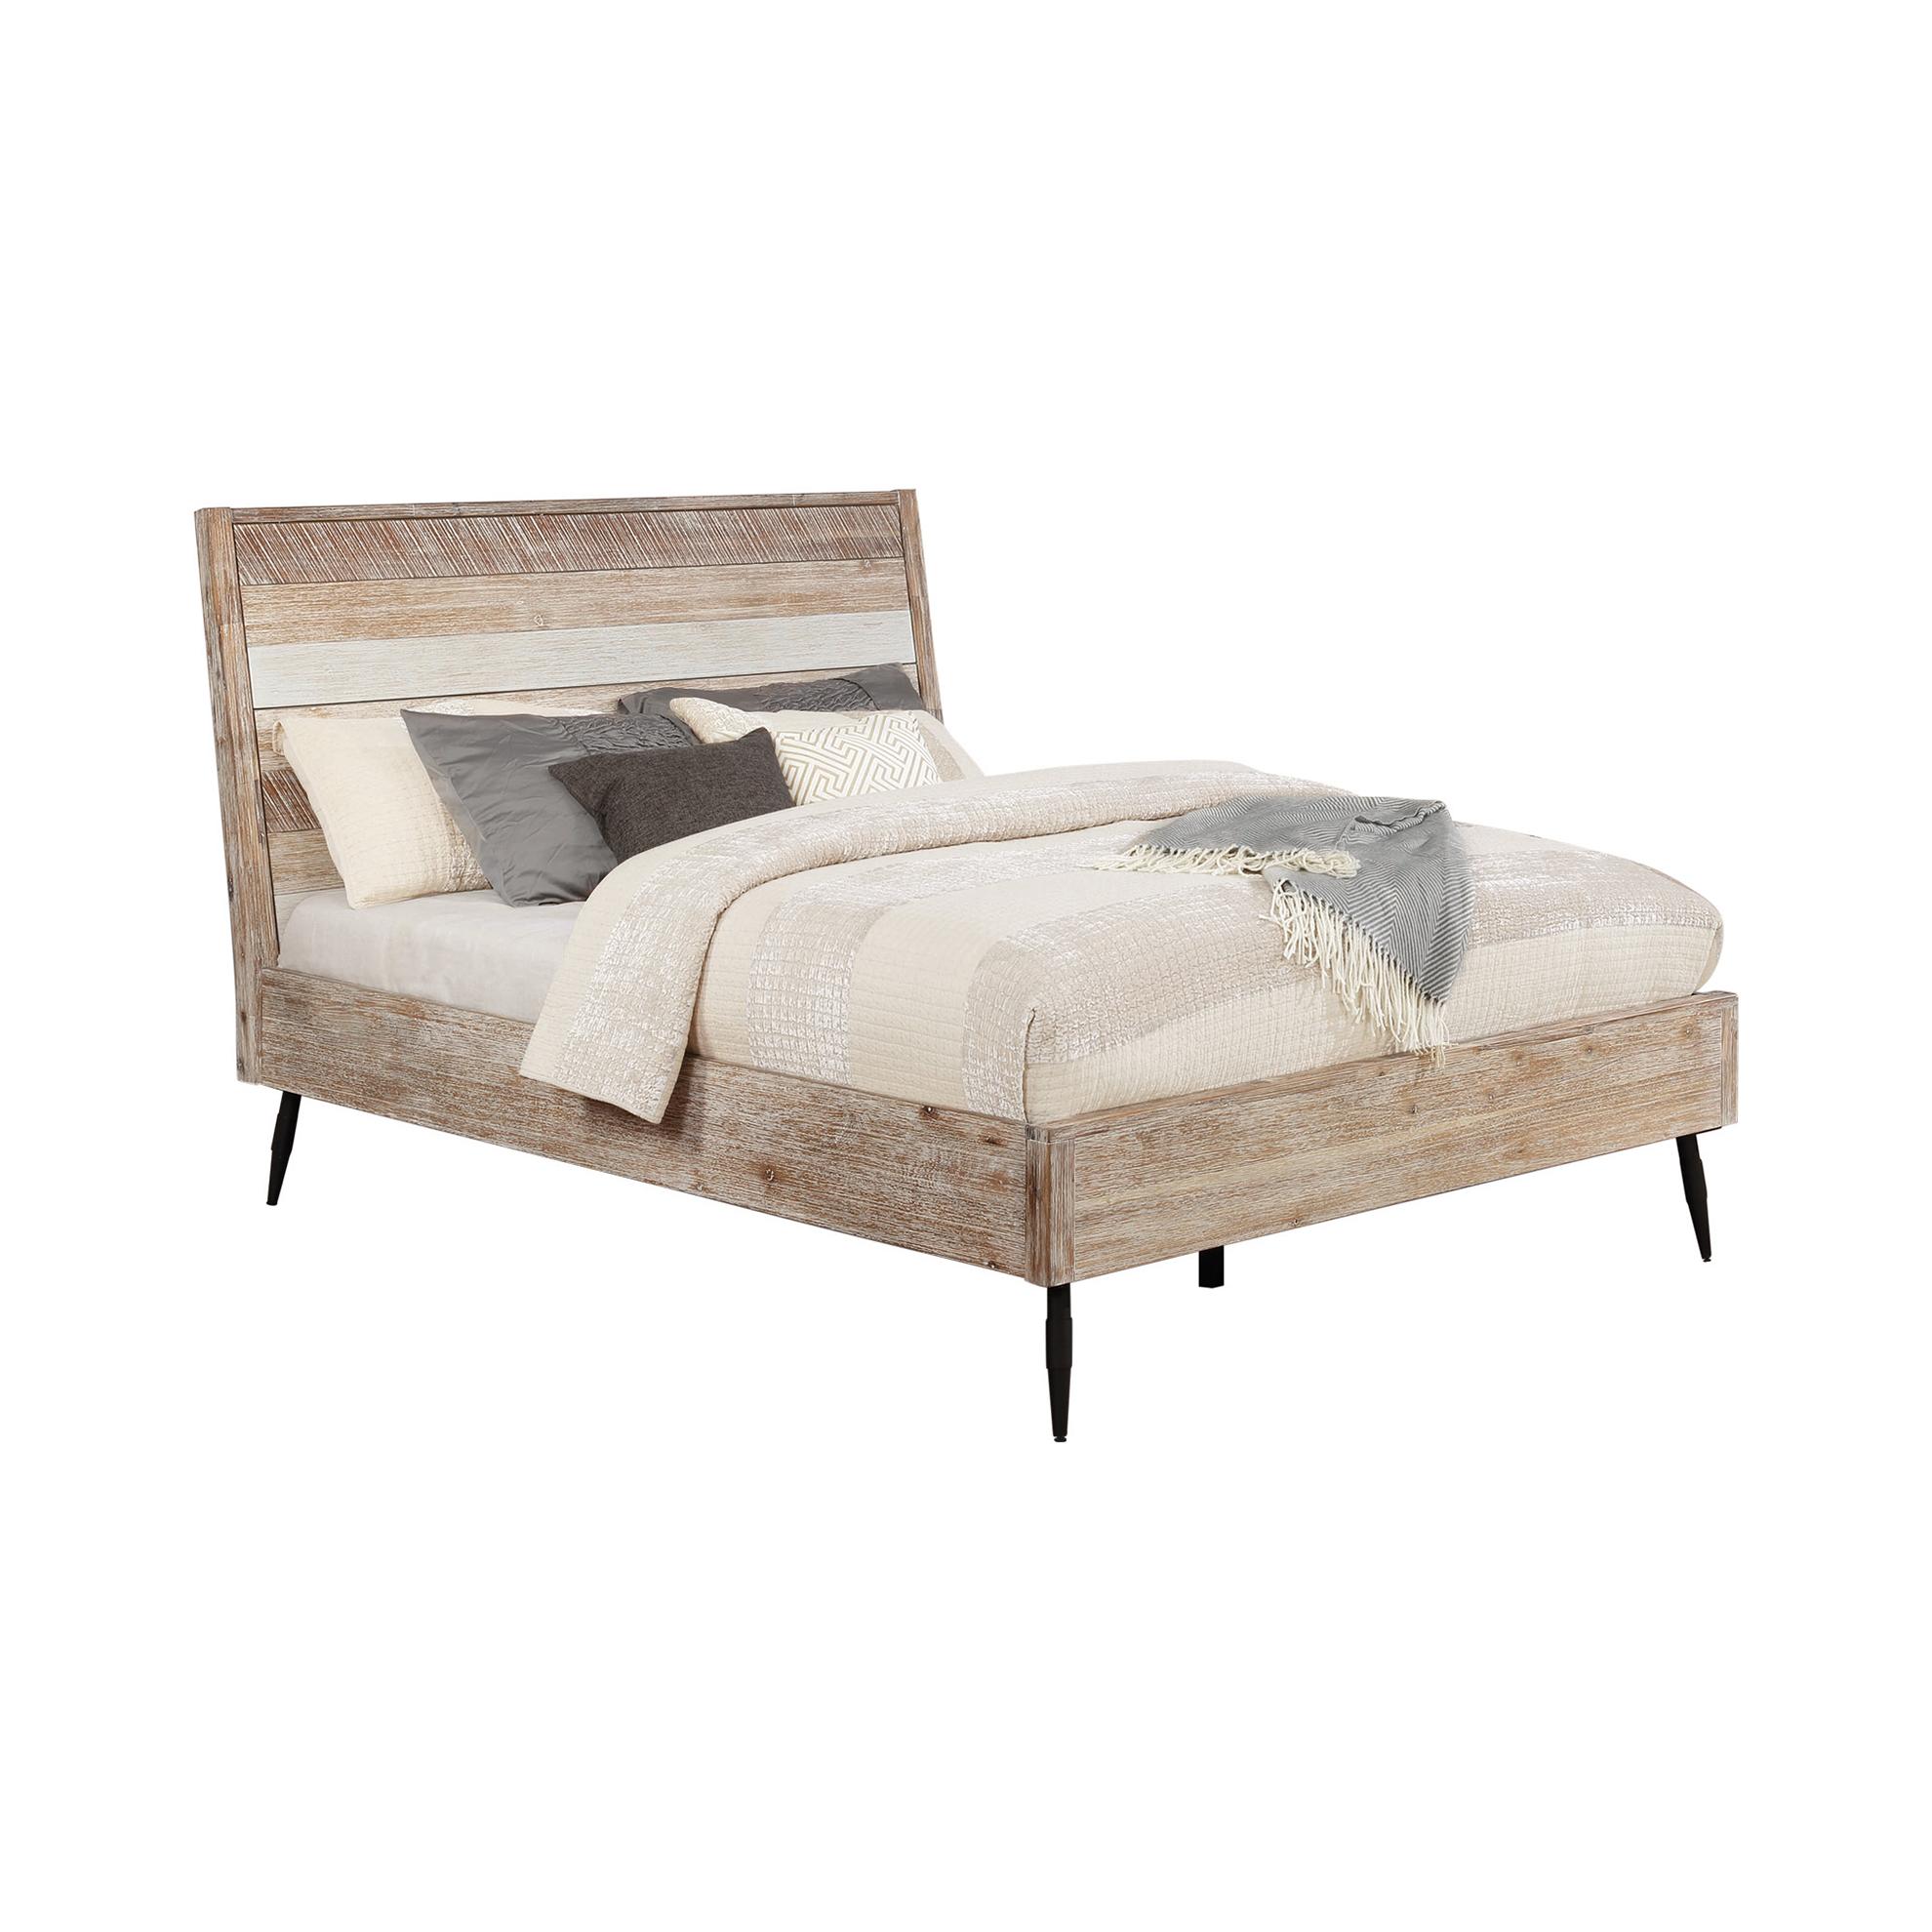 Rustic Bed 215761Q Marlow 215761Q in Natural 